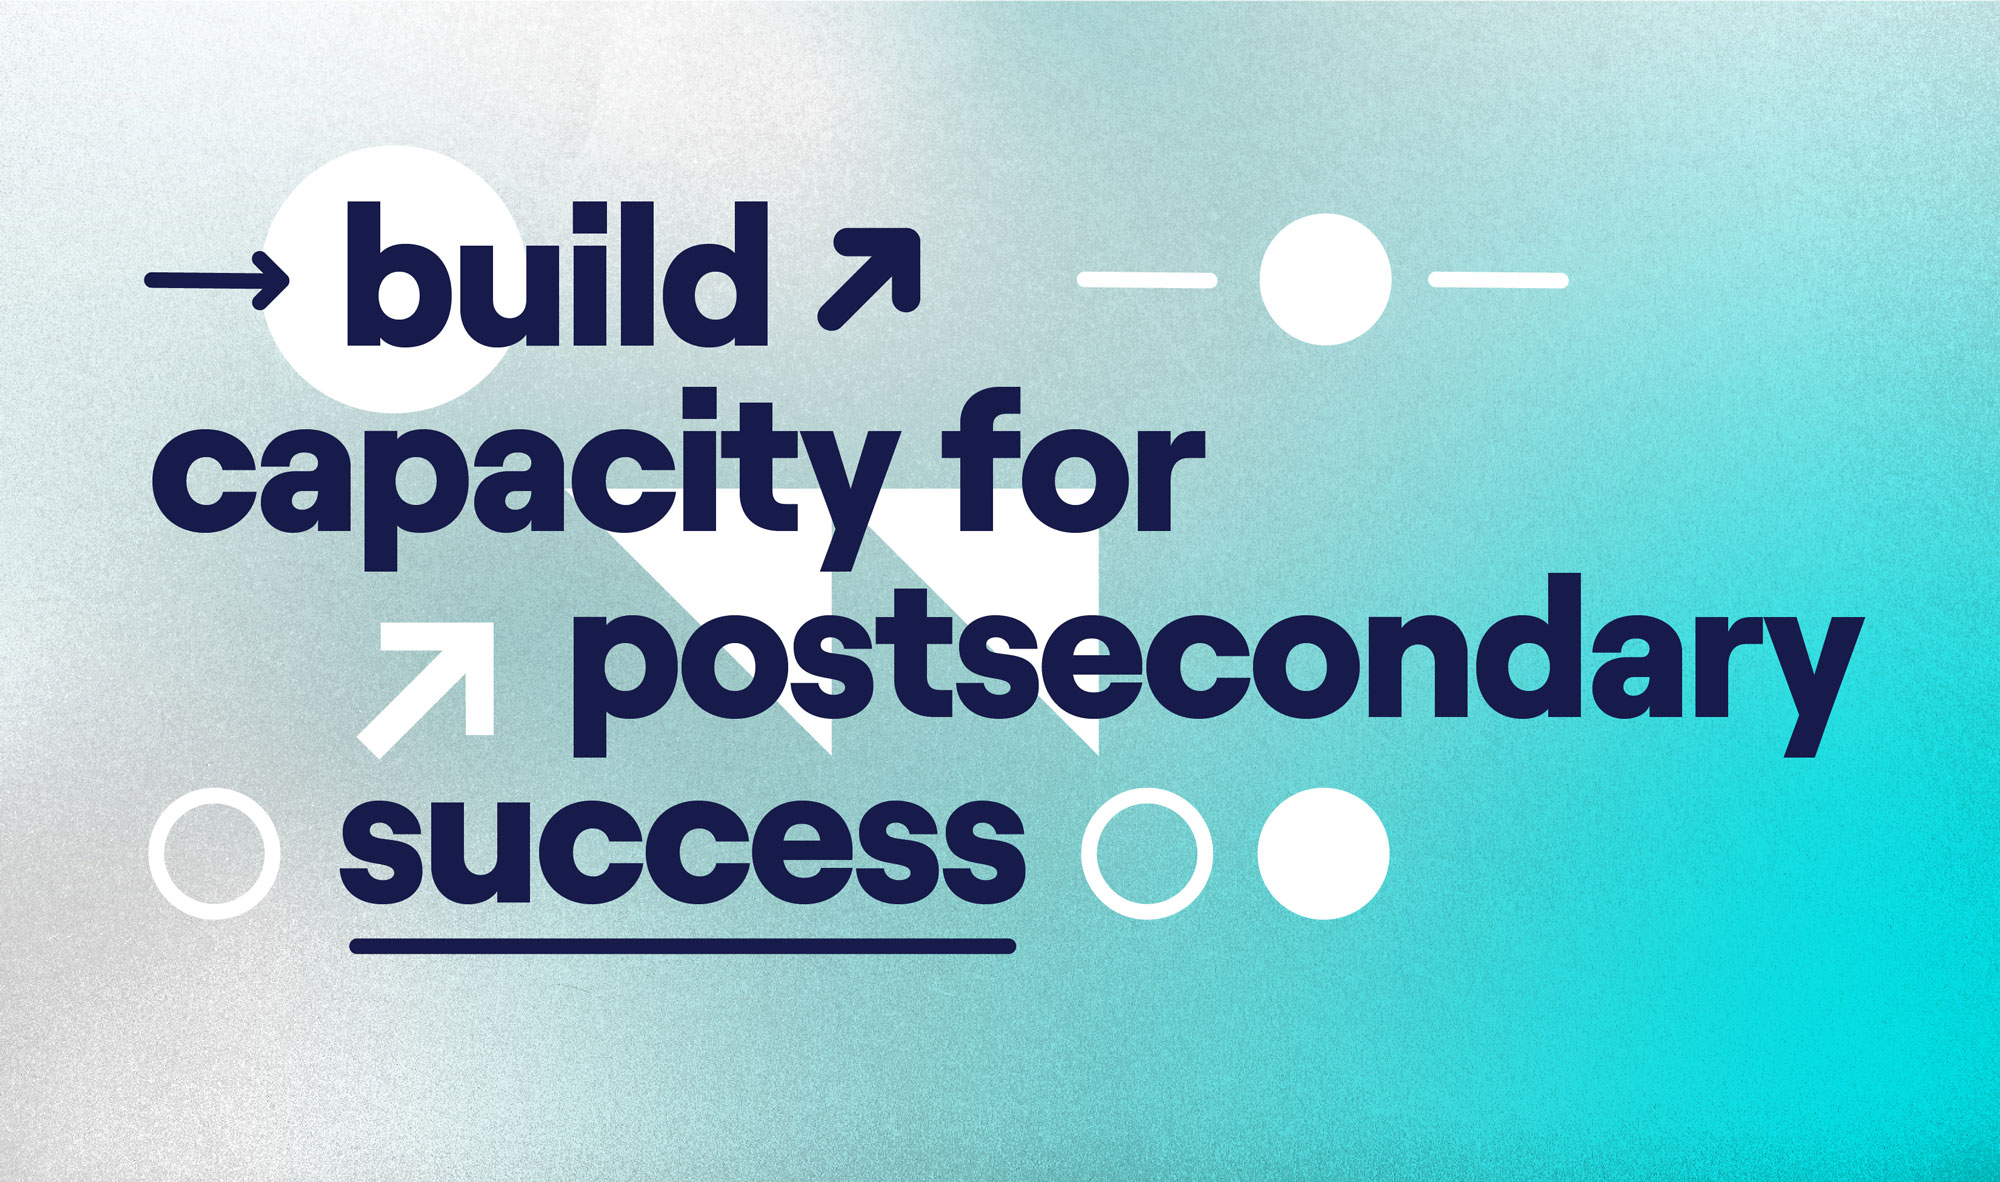 building capacity for postsecondary success